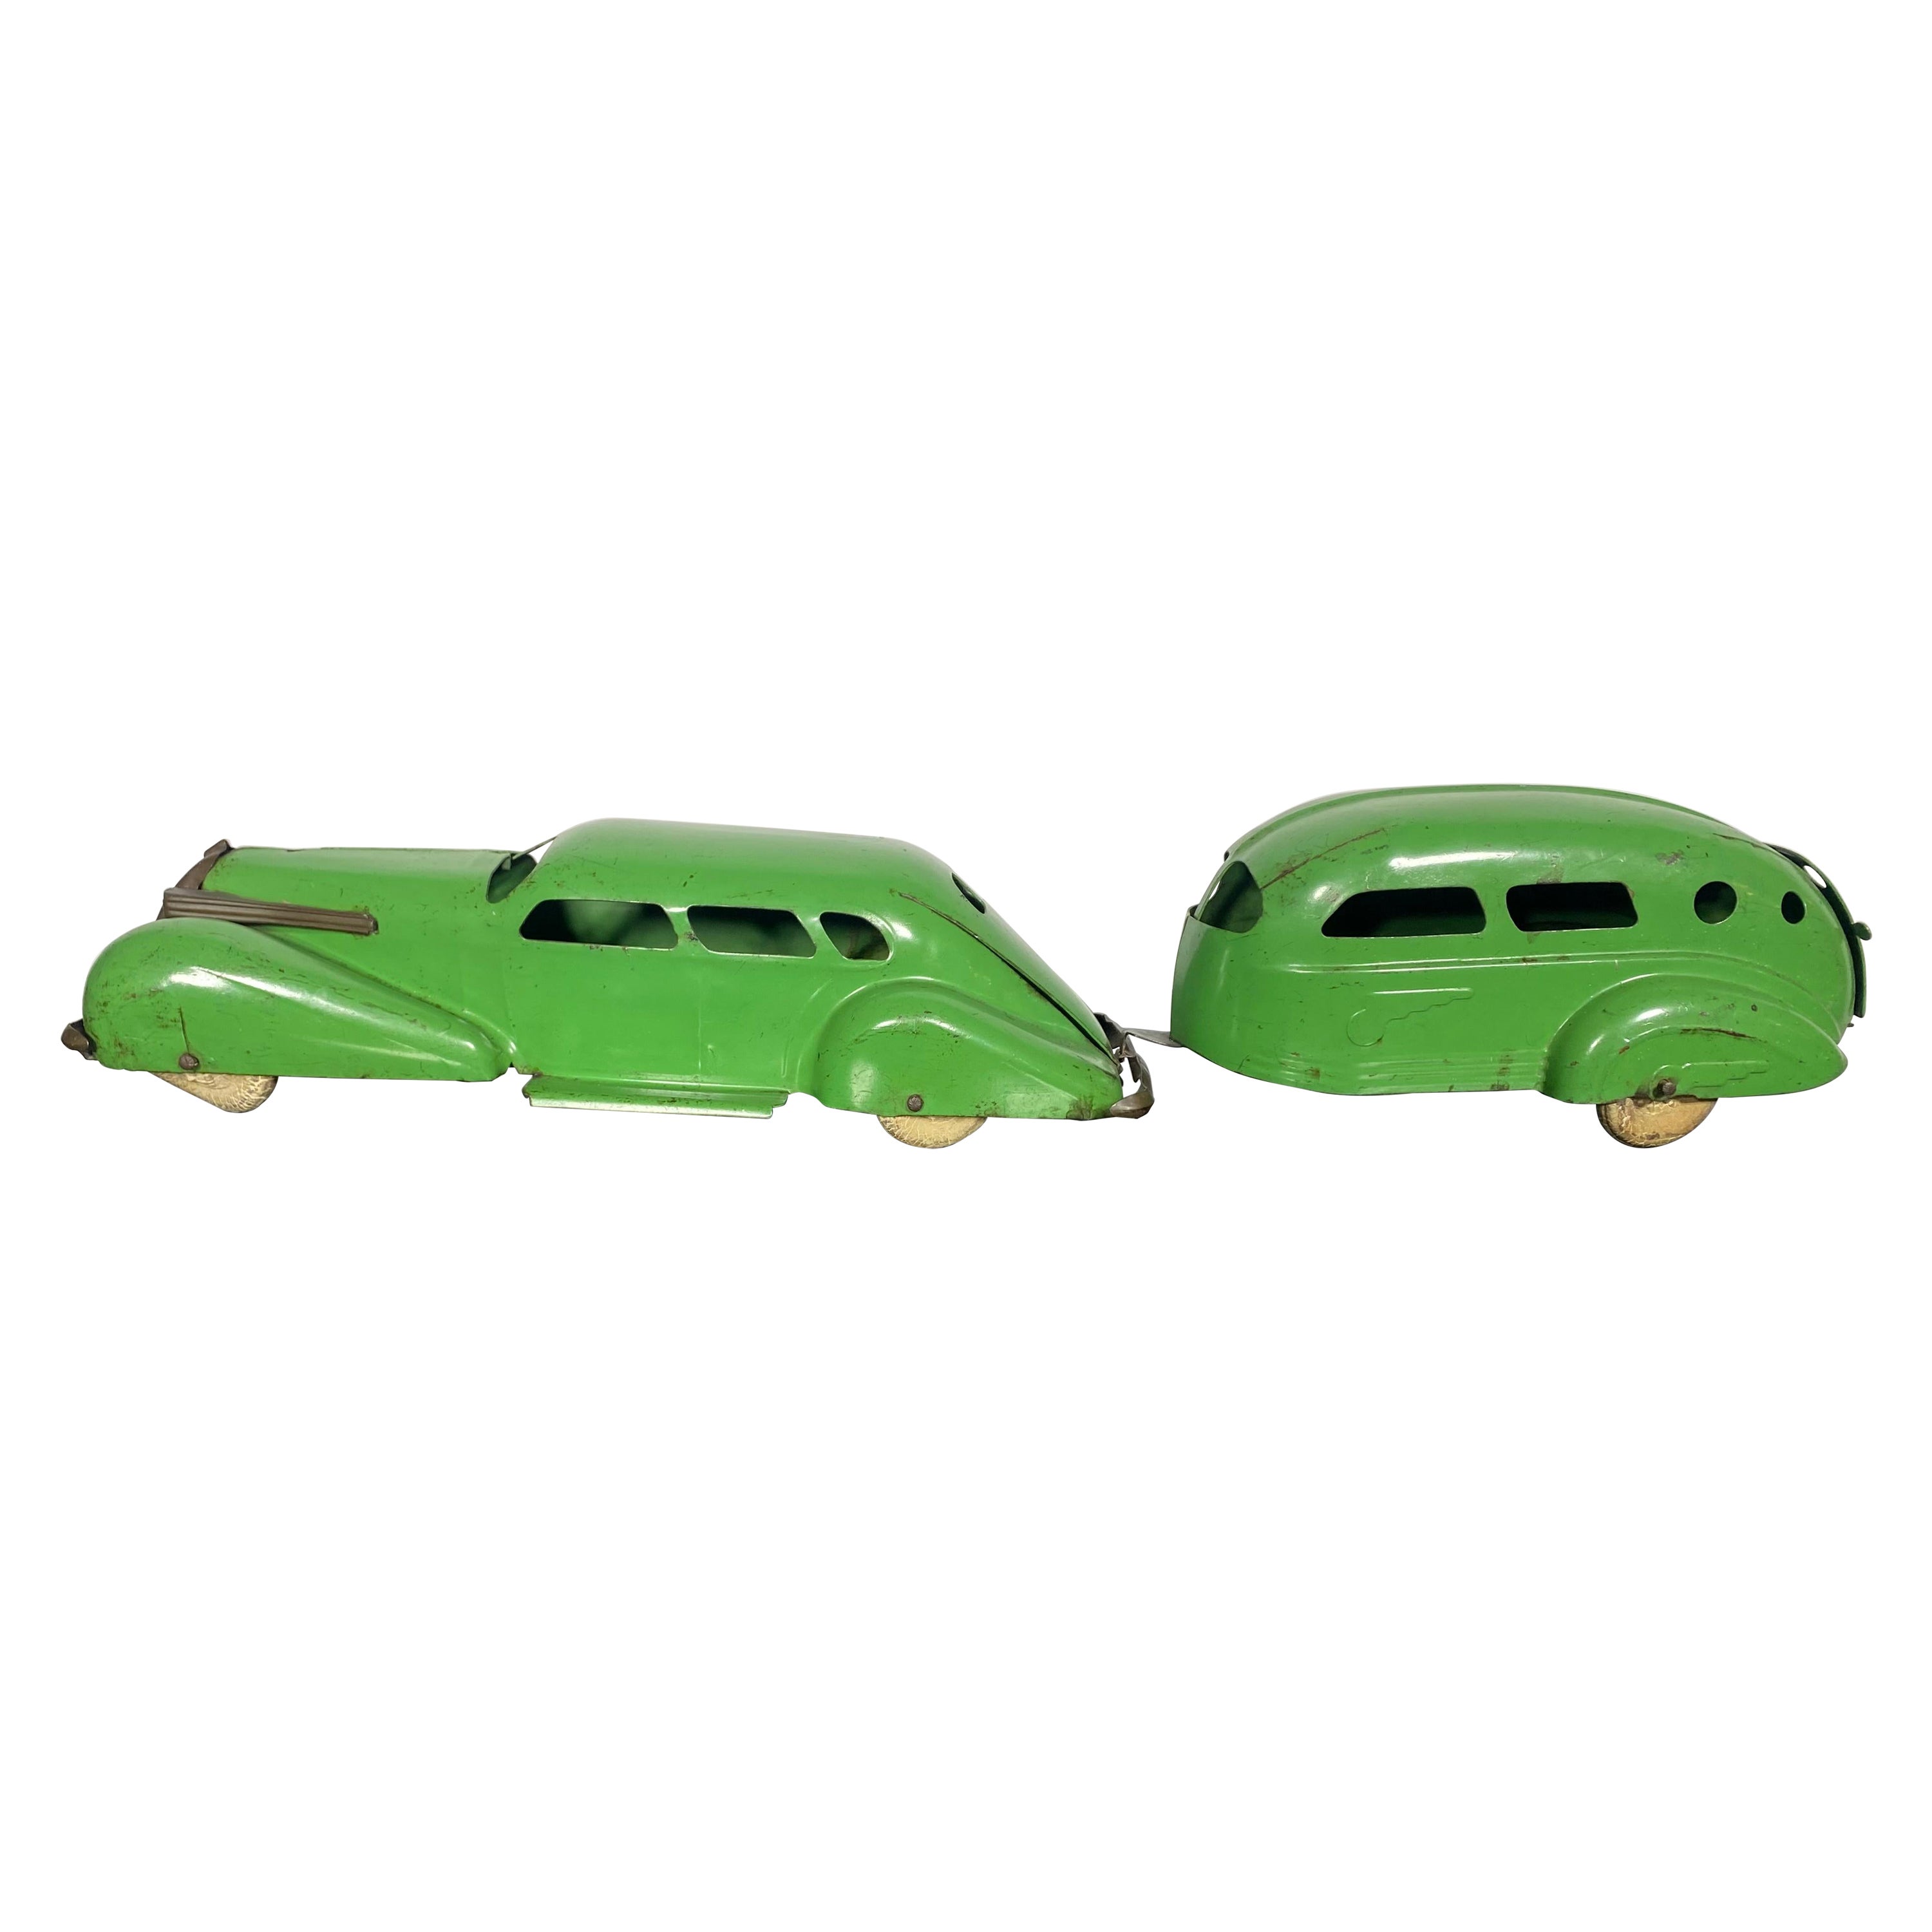 Wyandotte Lasalle Toy Car and Airstream Trailer .pressed steel , Art Deco For Sale